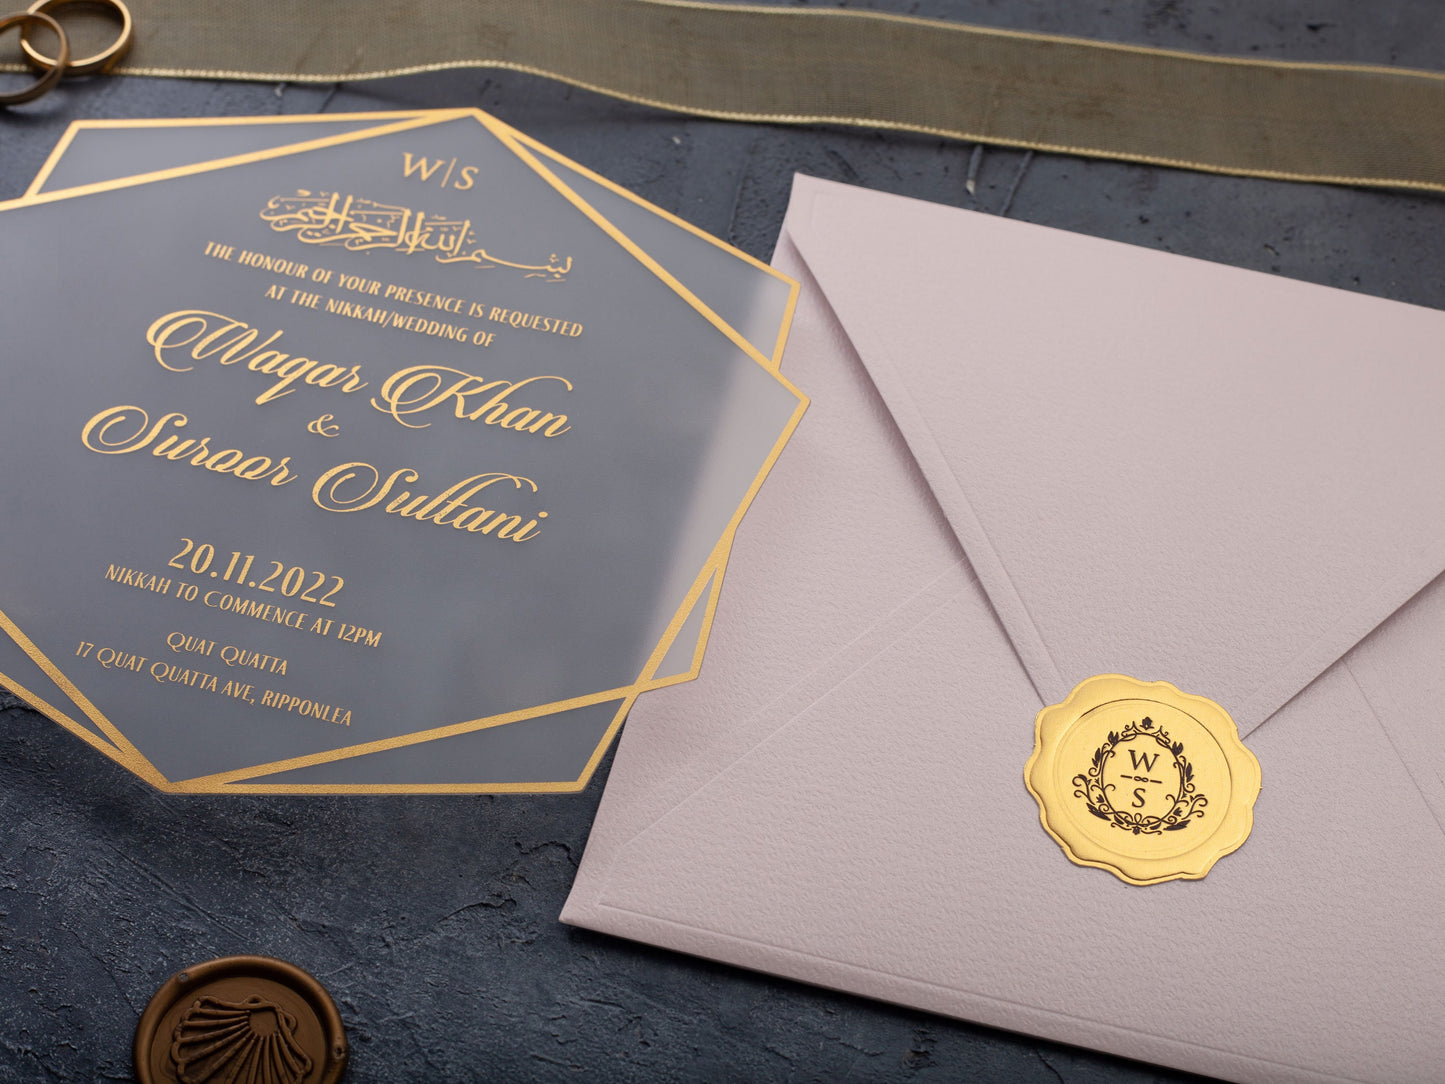 Acrylic wedding invite with gold foil